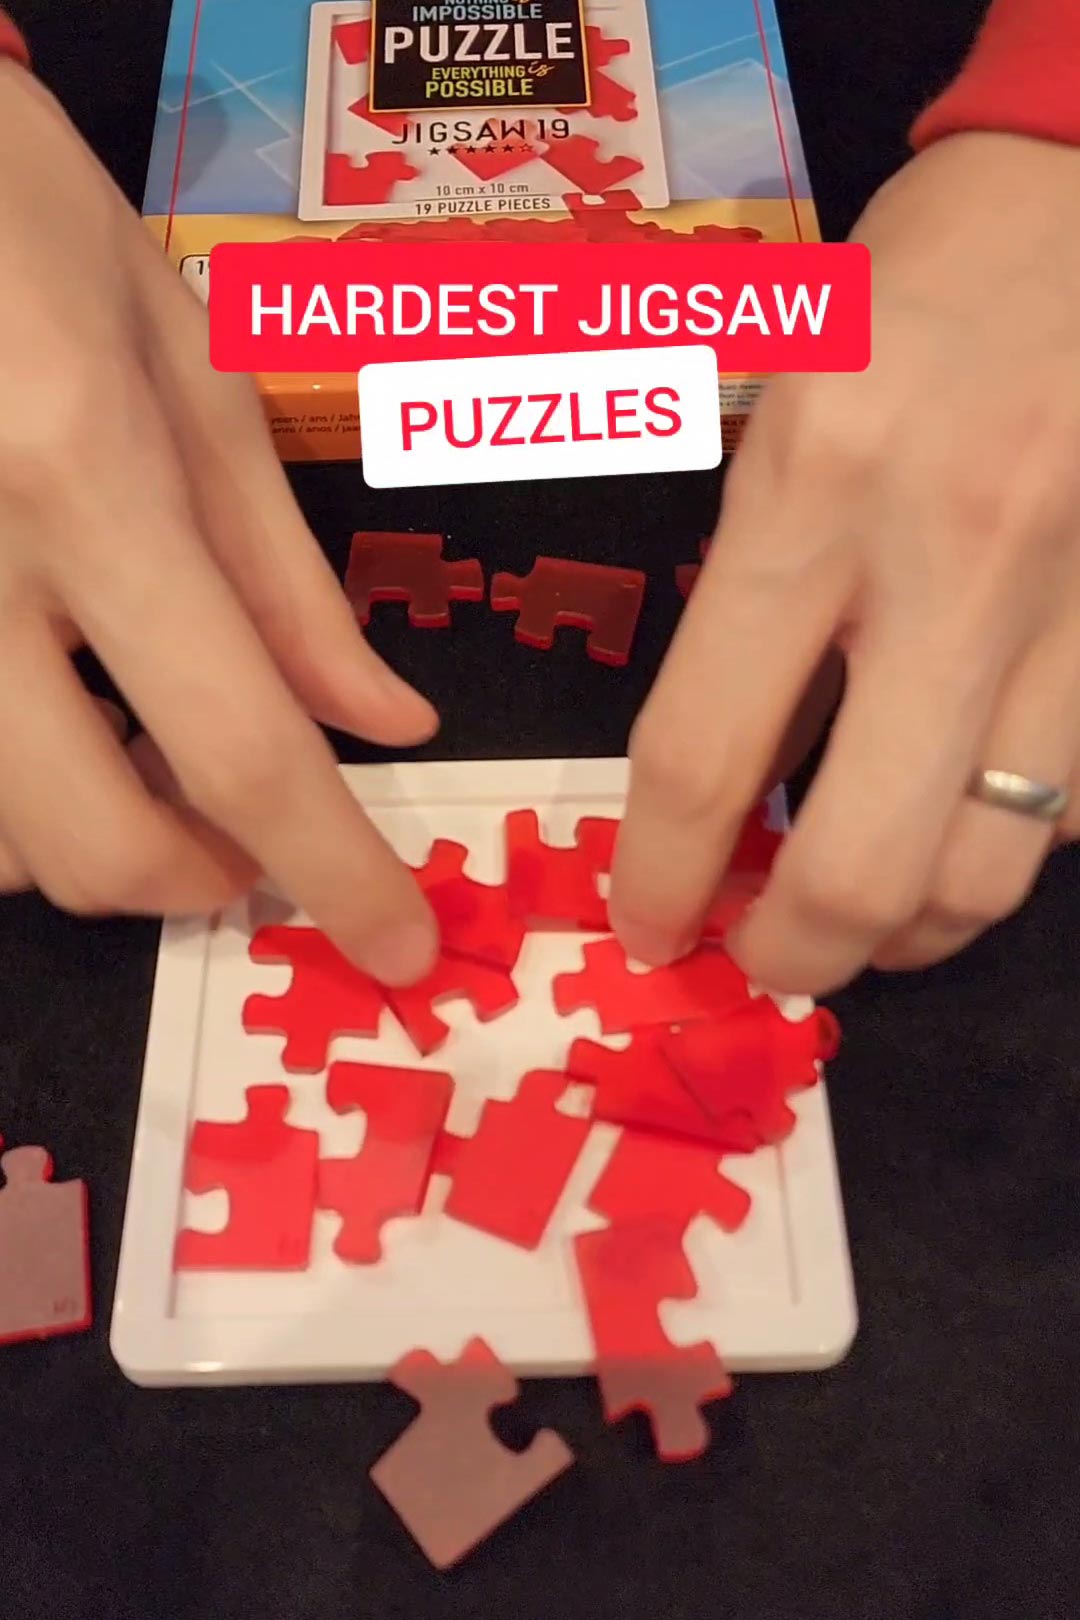 Two of the hardest jigsaw puzzles!